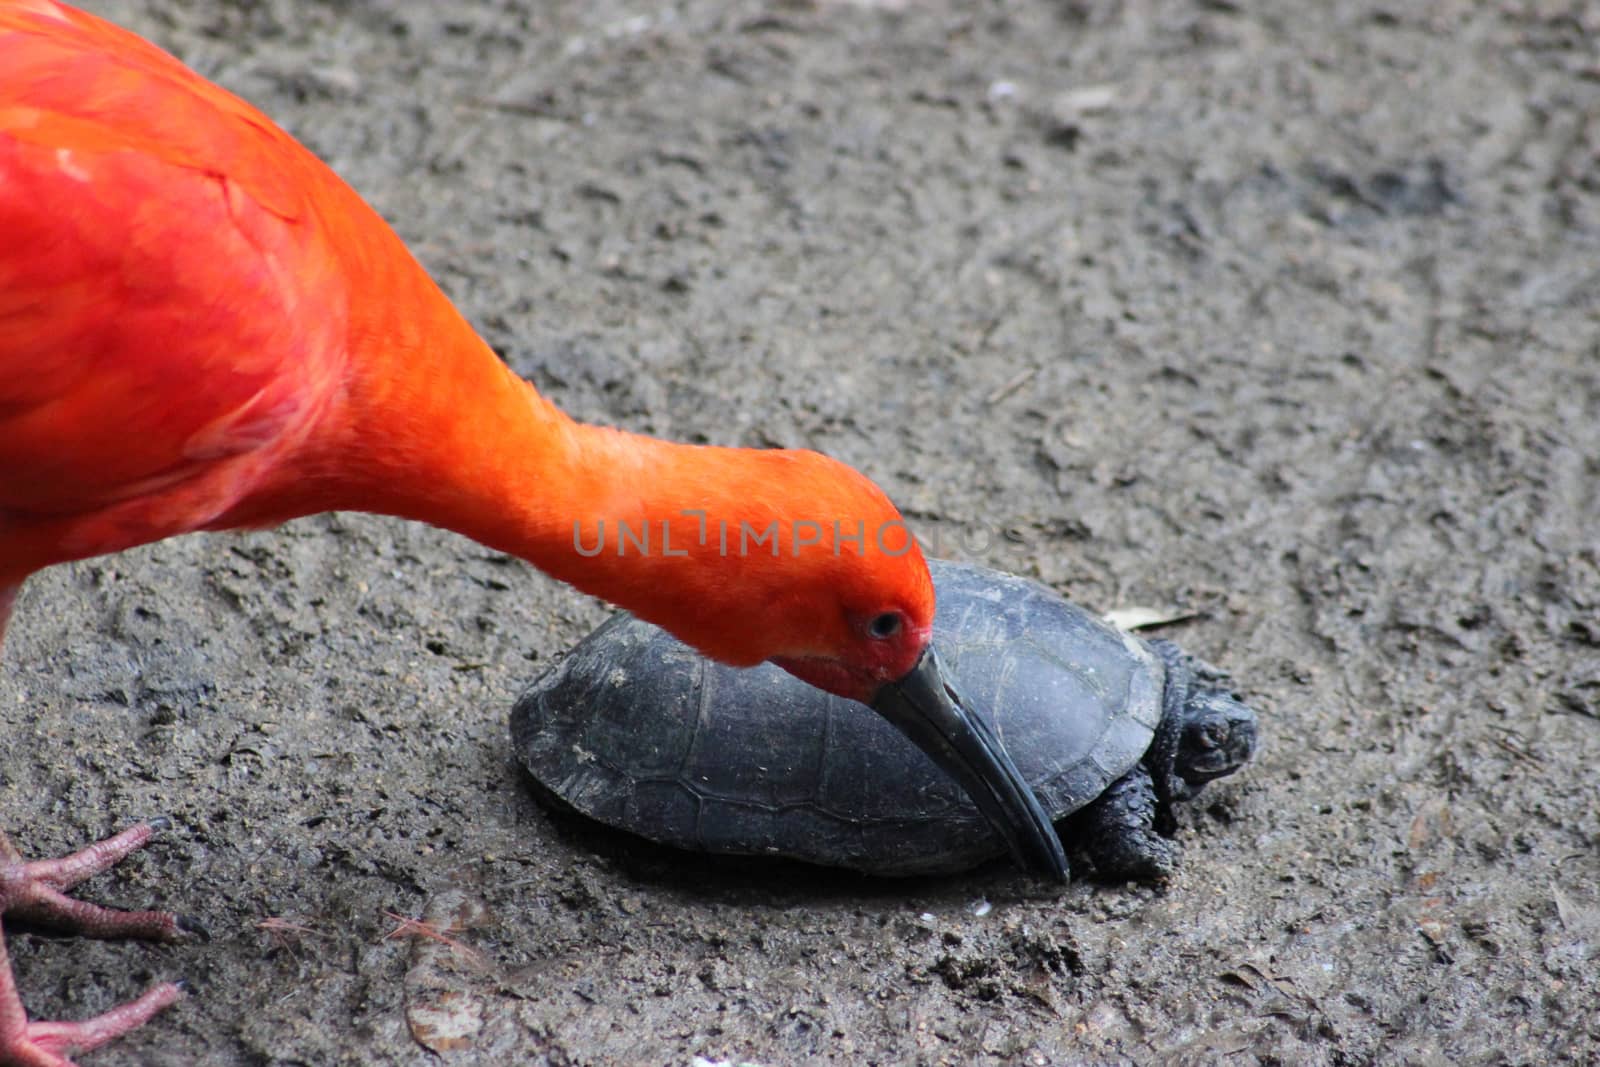 Scarlet Ibis playing with a turtle